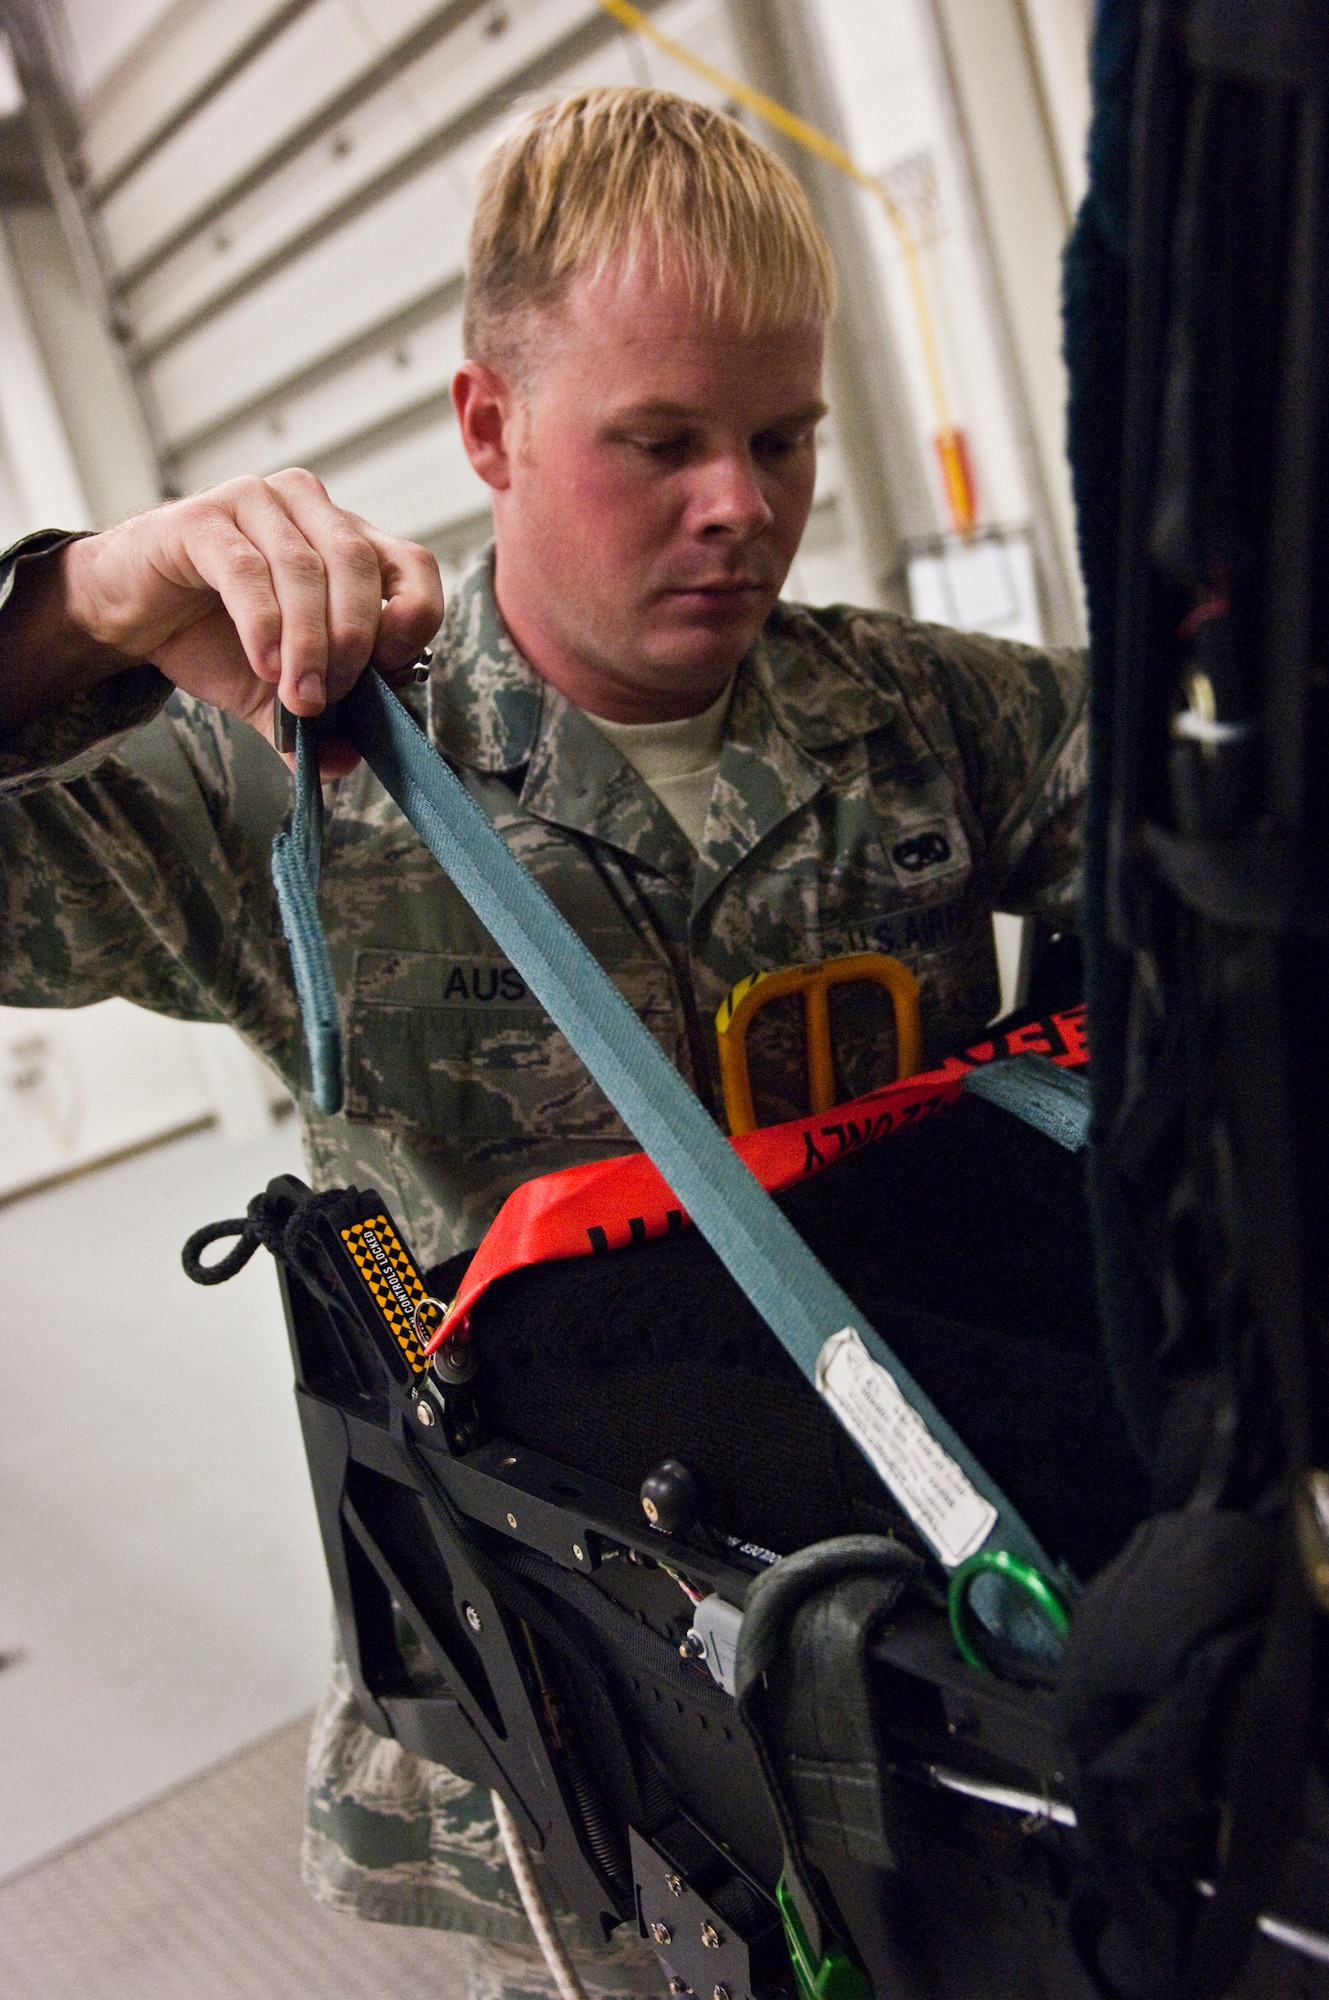 JOINT BASE ELMENDORF-RICHARDSON, Alaska – Senior Airman Jonathan Austin, 3rd Component Maintenance Squadron Egress Flight, looks over an F-15 Eagle ejection seat Aug. 5. The 3rd CMS was recently named the recipients of the 2010 Secretary of Defense Field-Level Maintenance Award, small category. (Air Force photo by Airman 1st Class Christopher Gross)